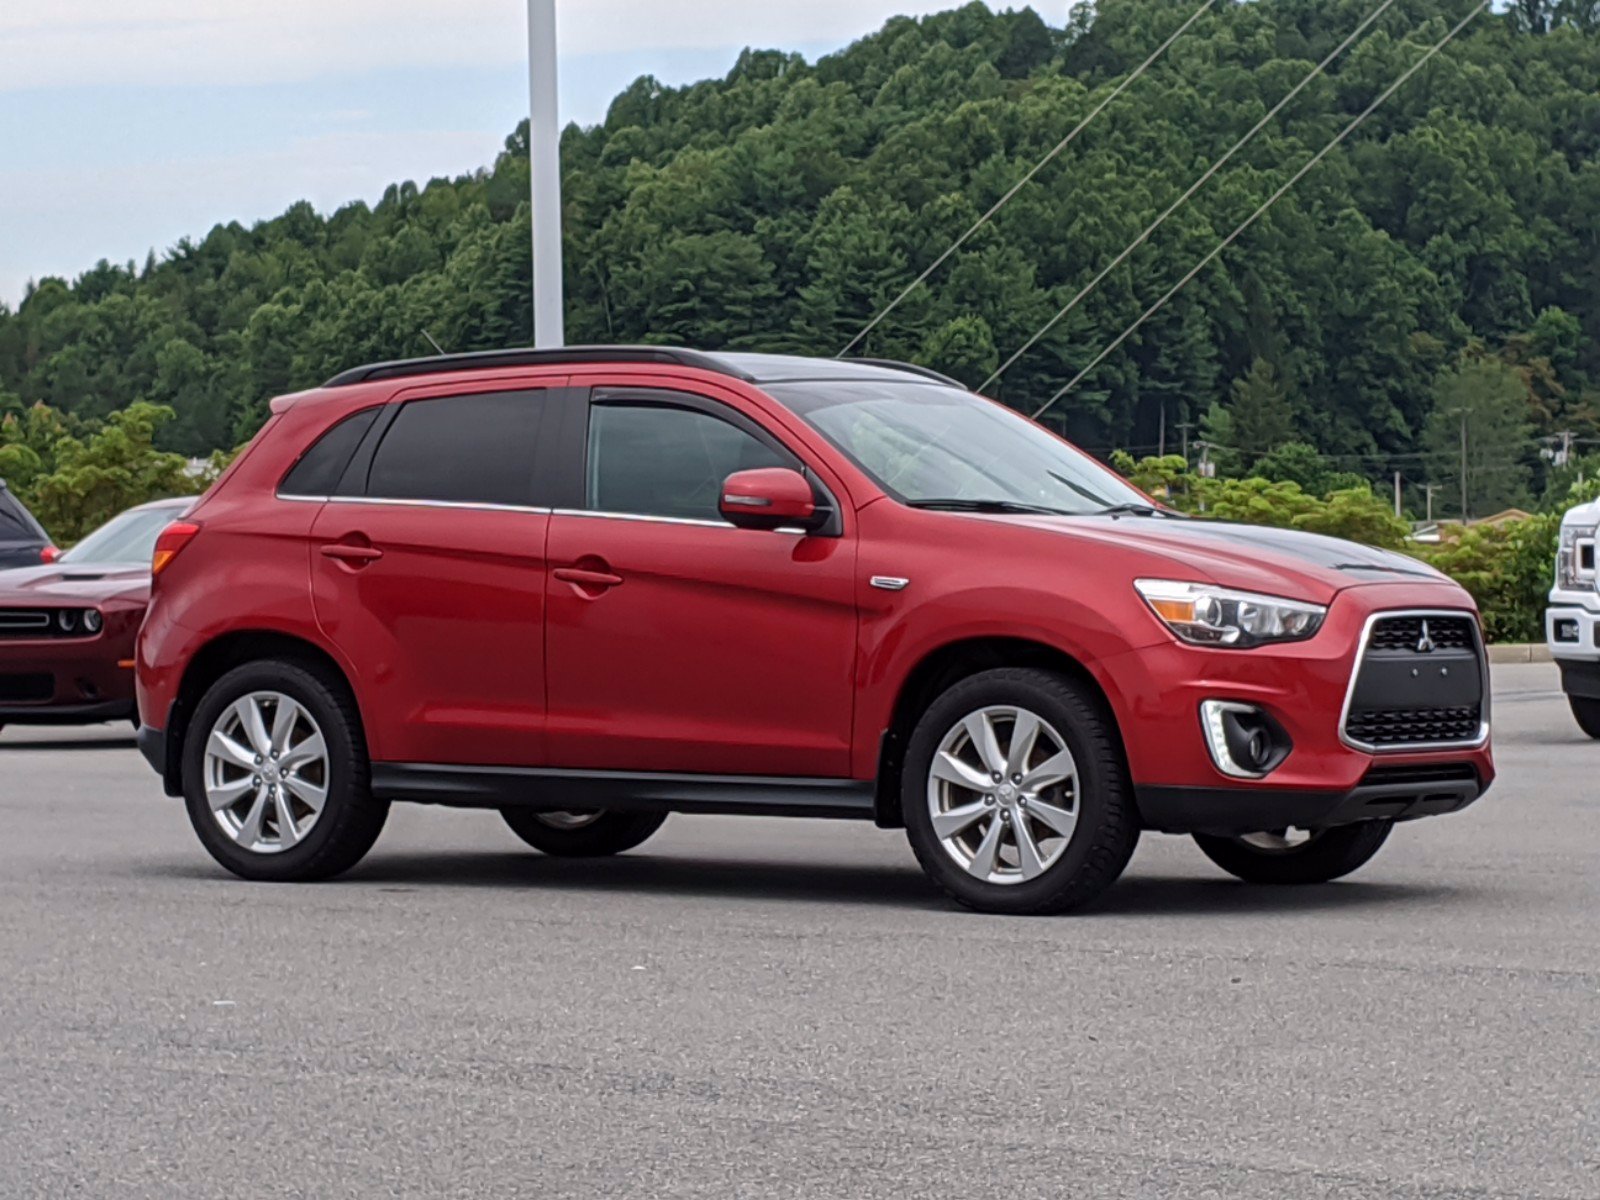 PreOwned 2015 Mitsubishi Outlander Sport 2.4 GT 4WD Sport